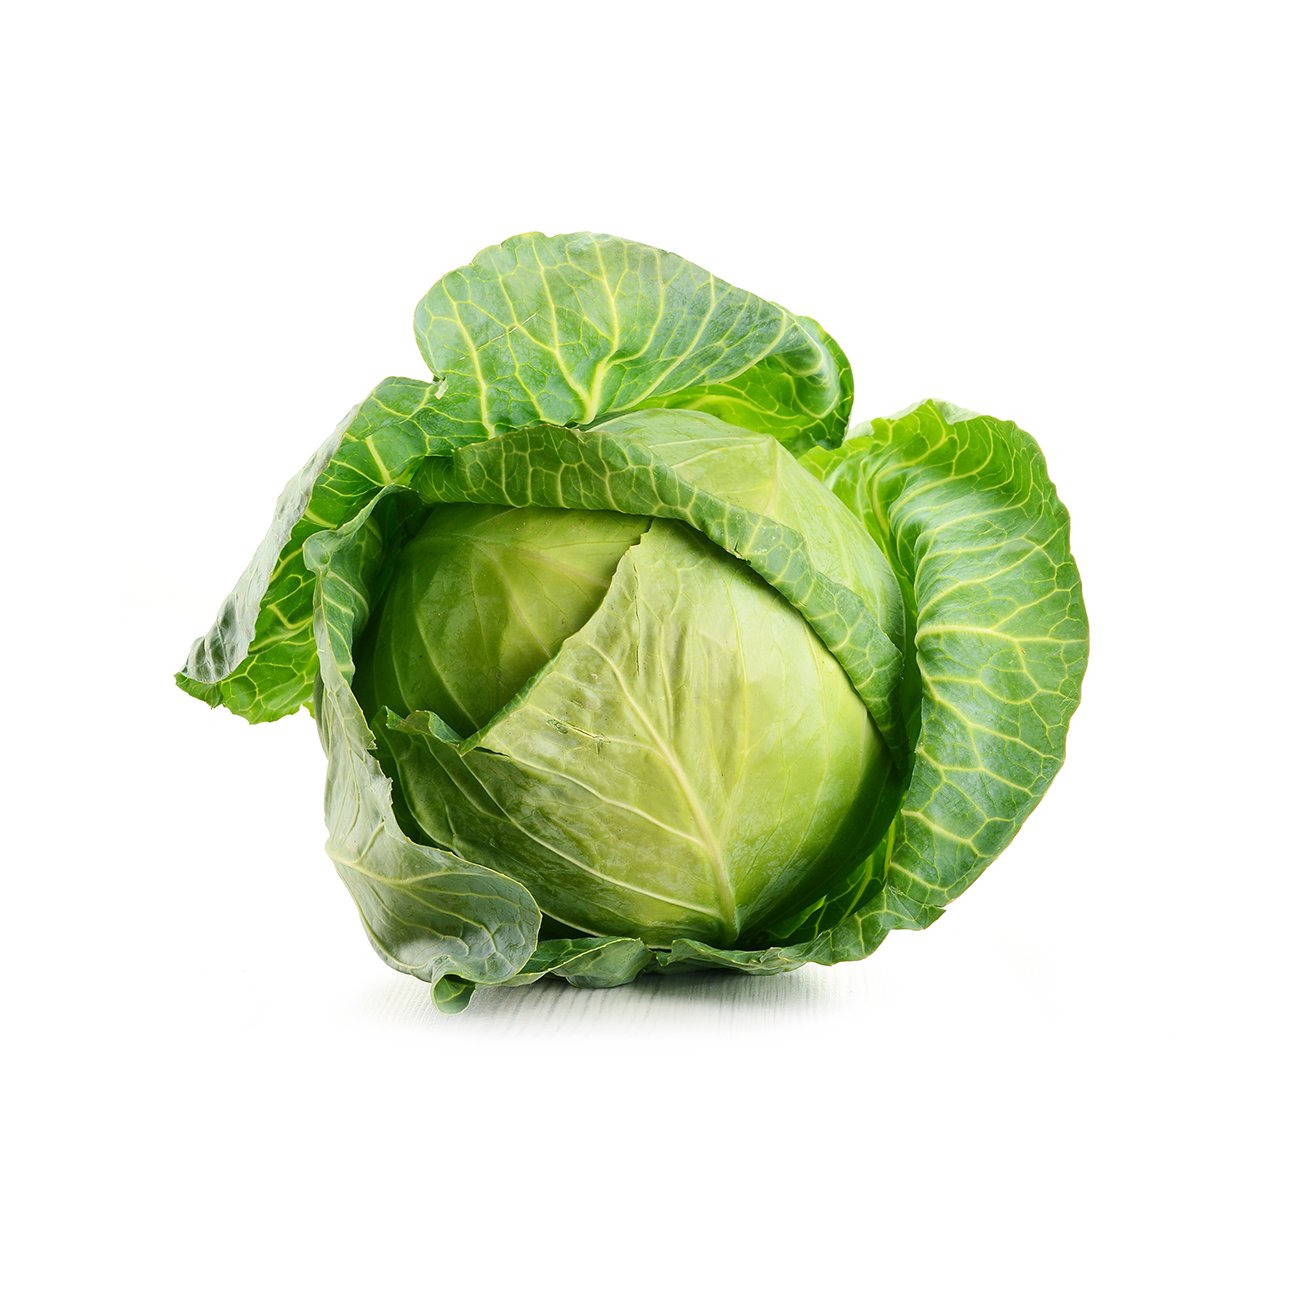 cabbage,-white-or-green.jpg